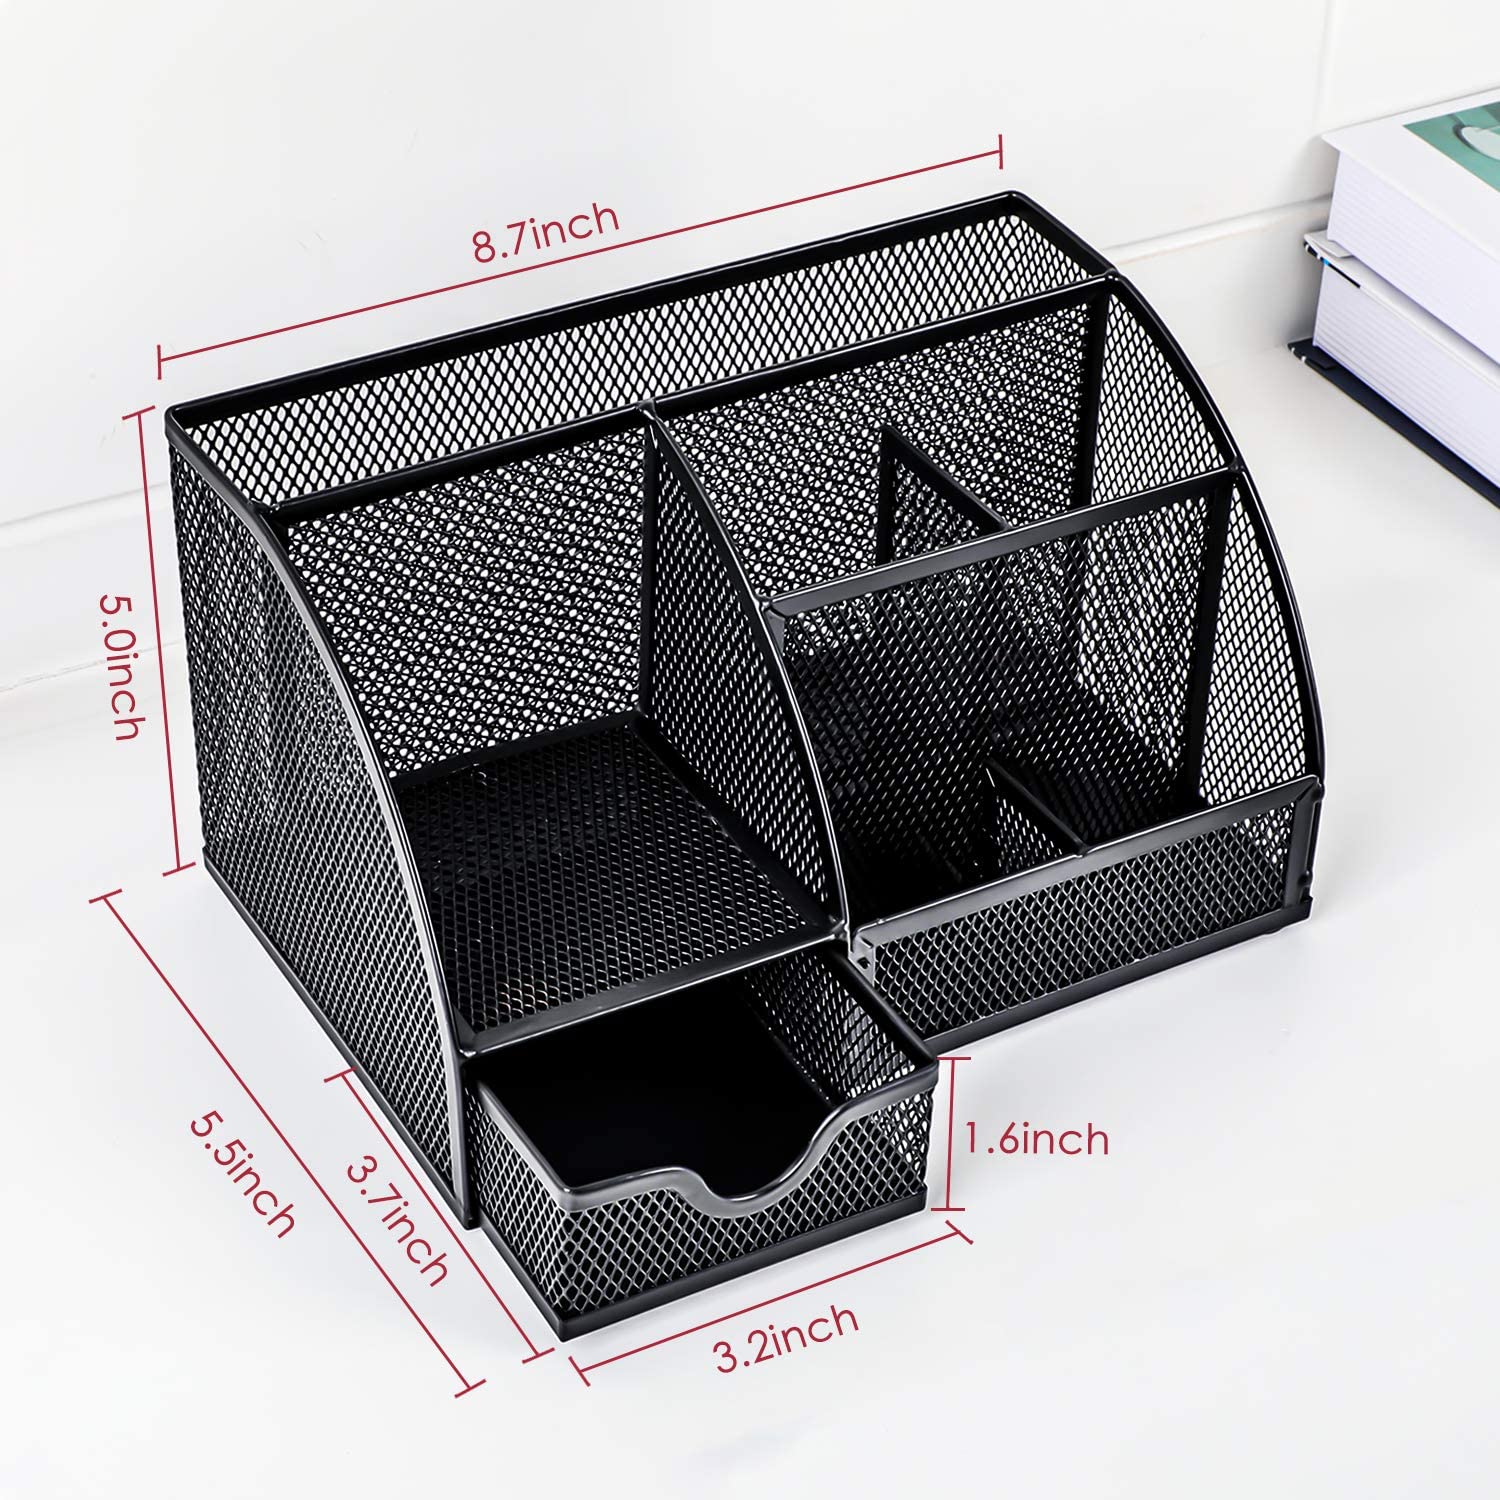 Multifunctional Office Accessories Mesh Office Supplies Desk Organizer Caddy with 6 Compartments for Home Office ,School - image 3 of 7